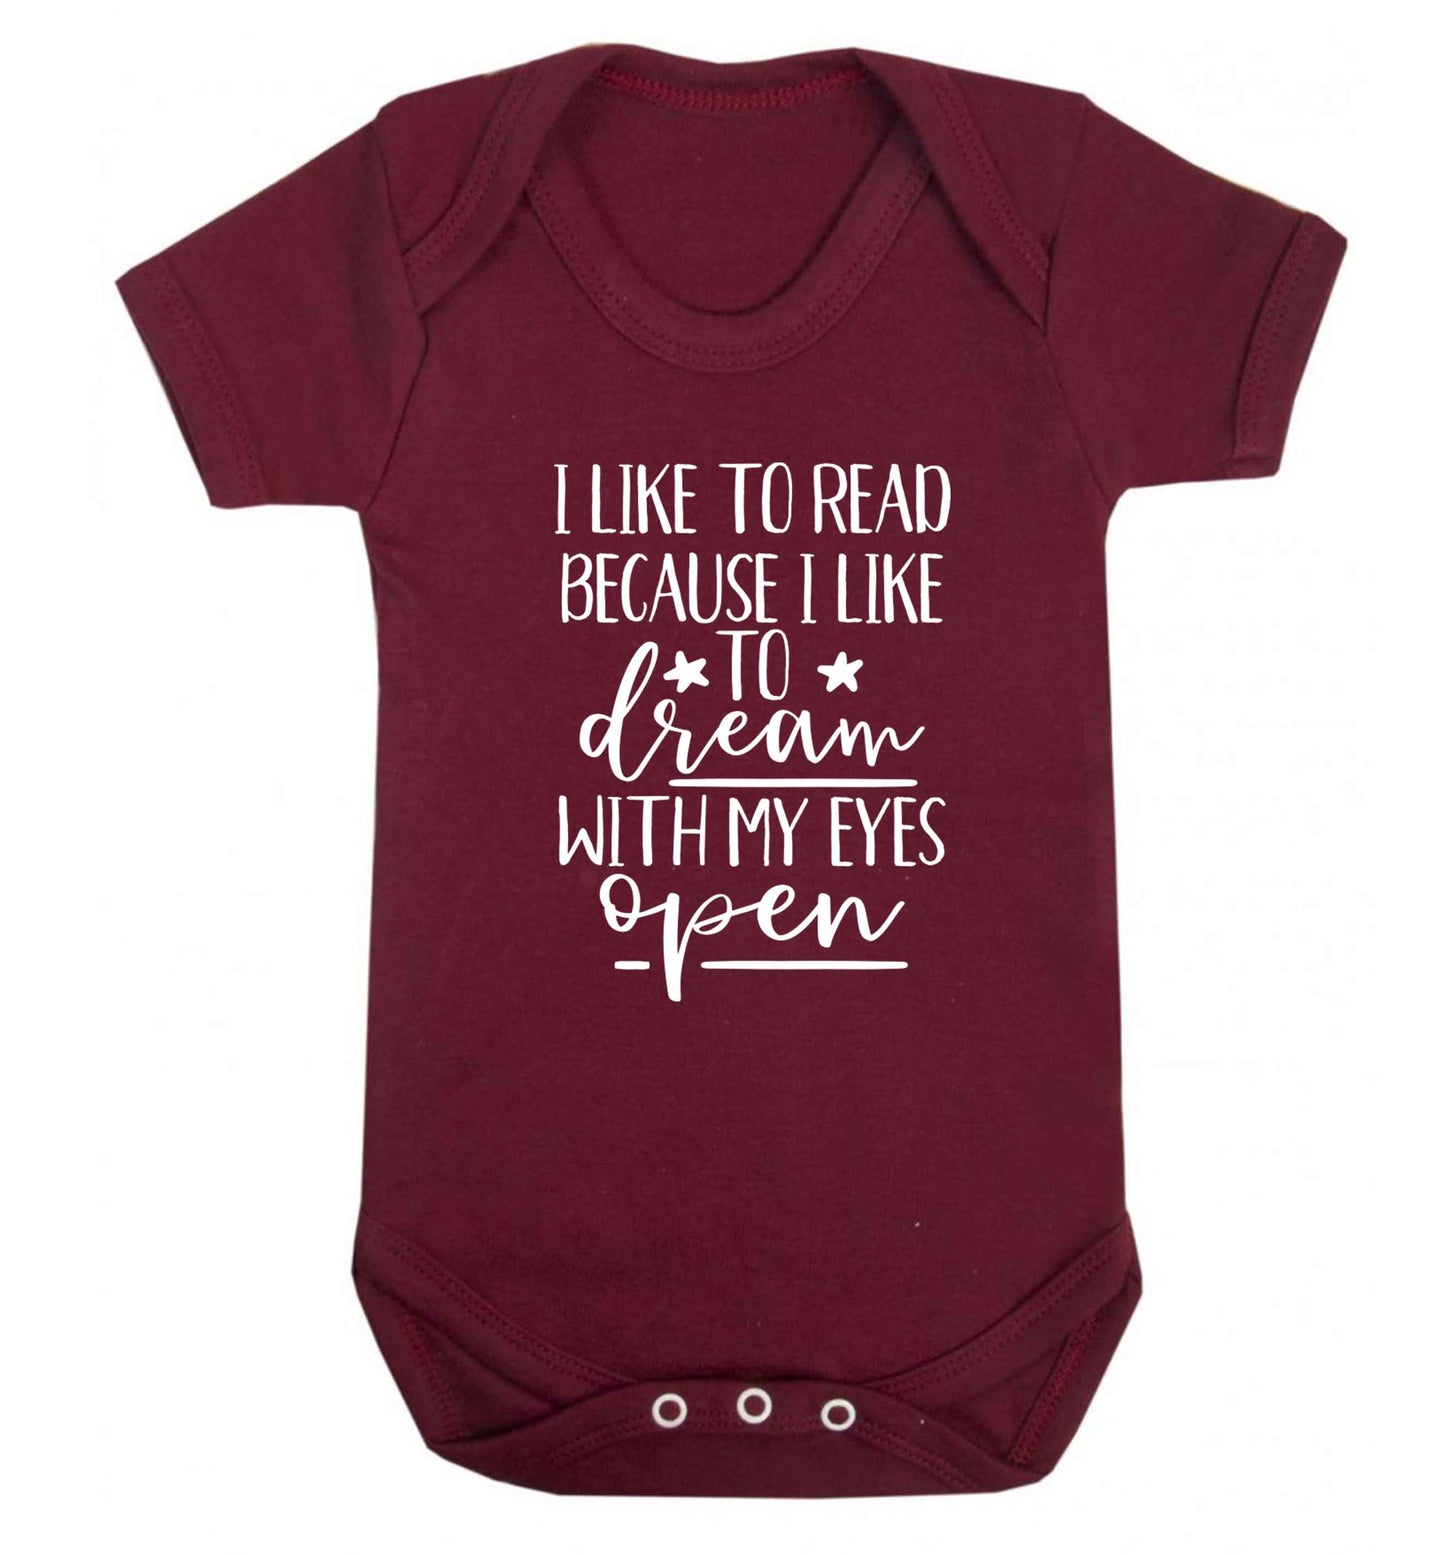 I like to read because I like to dream with my eyes open Baby Vest maroon 18-24 months